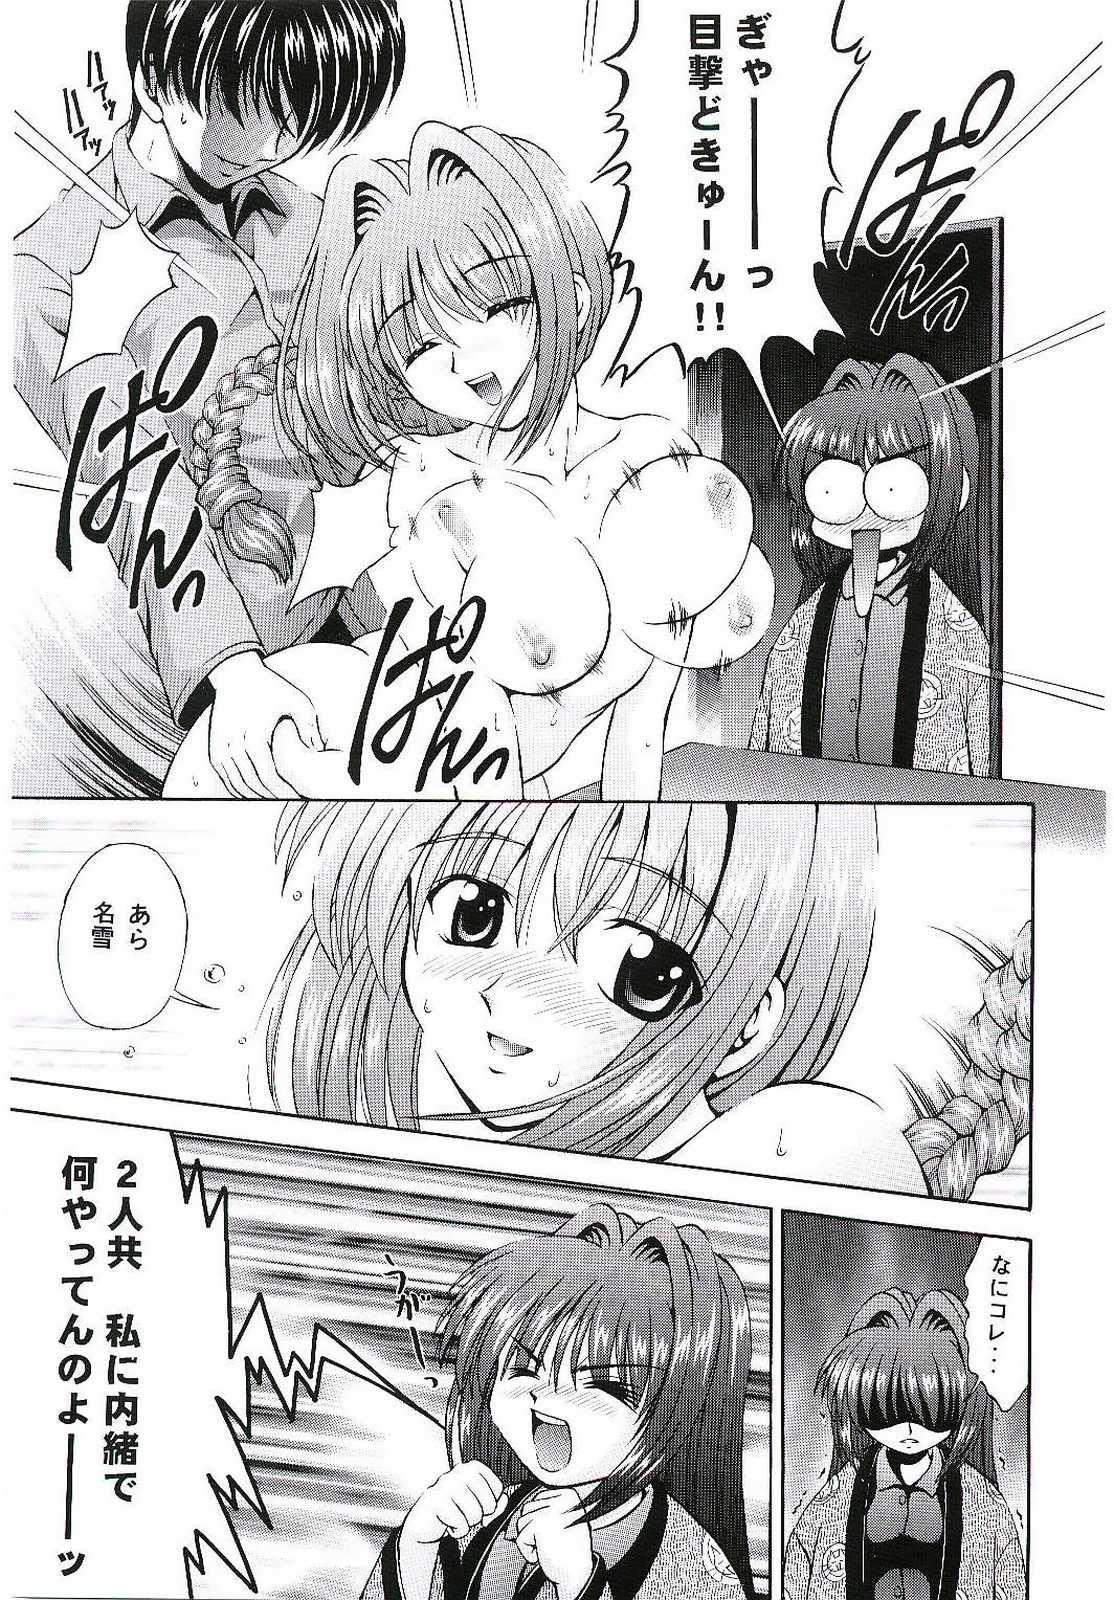 All Six Piece 1 - Kanon Women Sucking Dick - Page 10